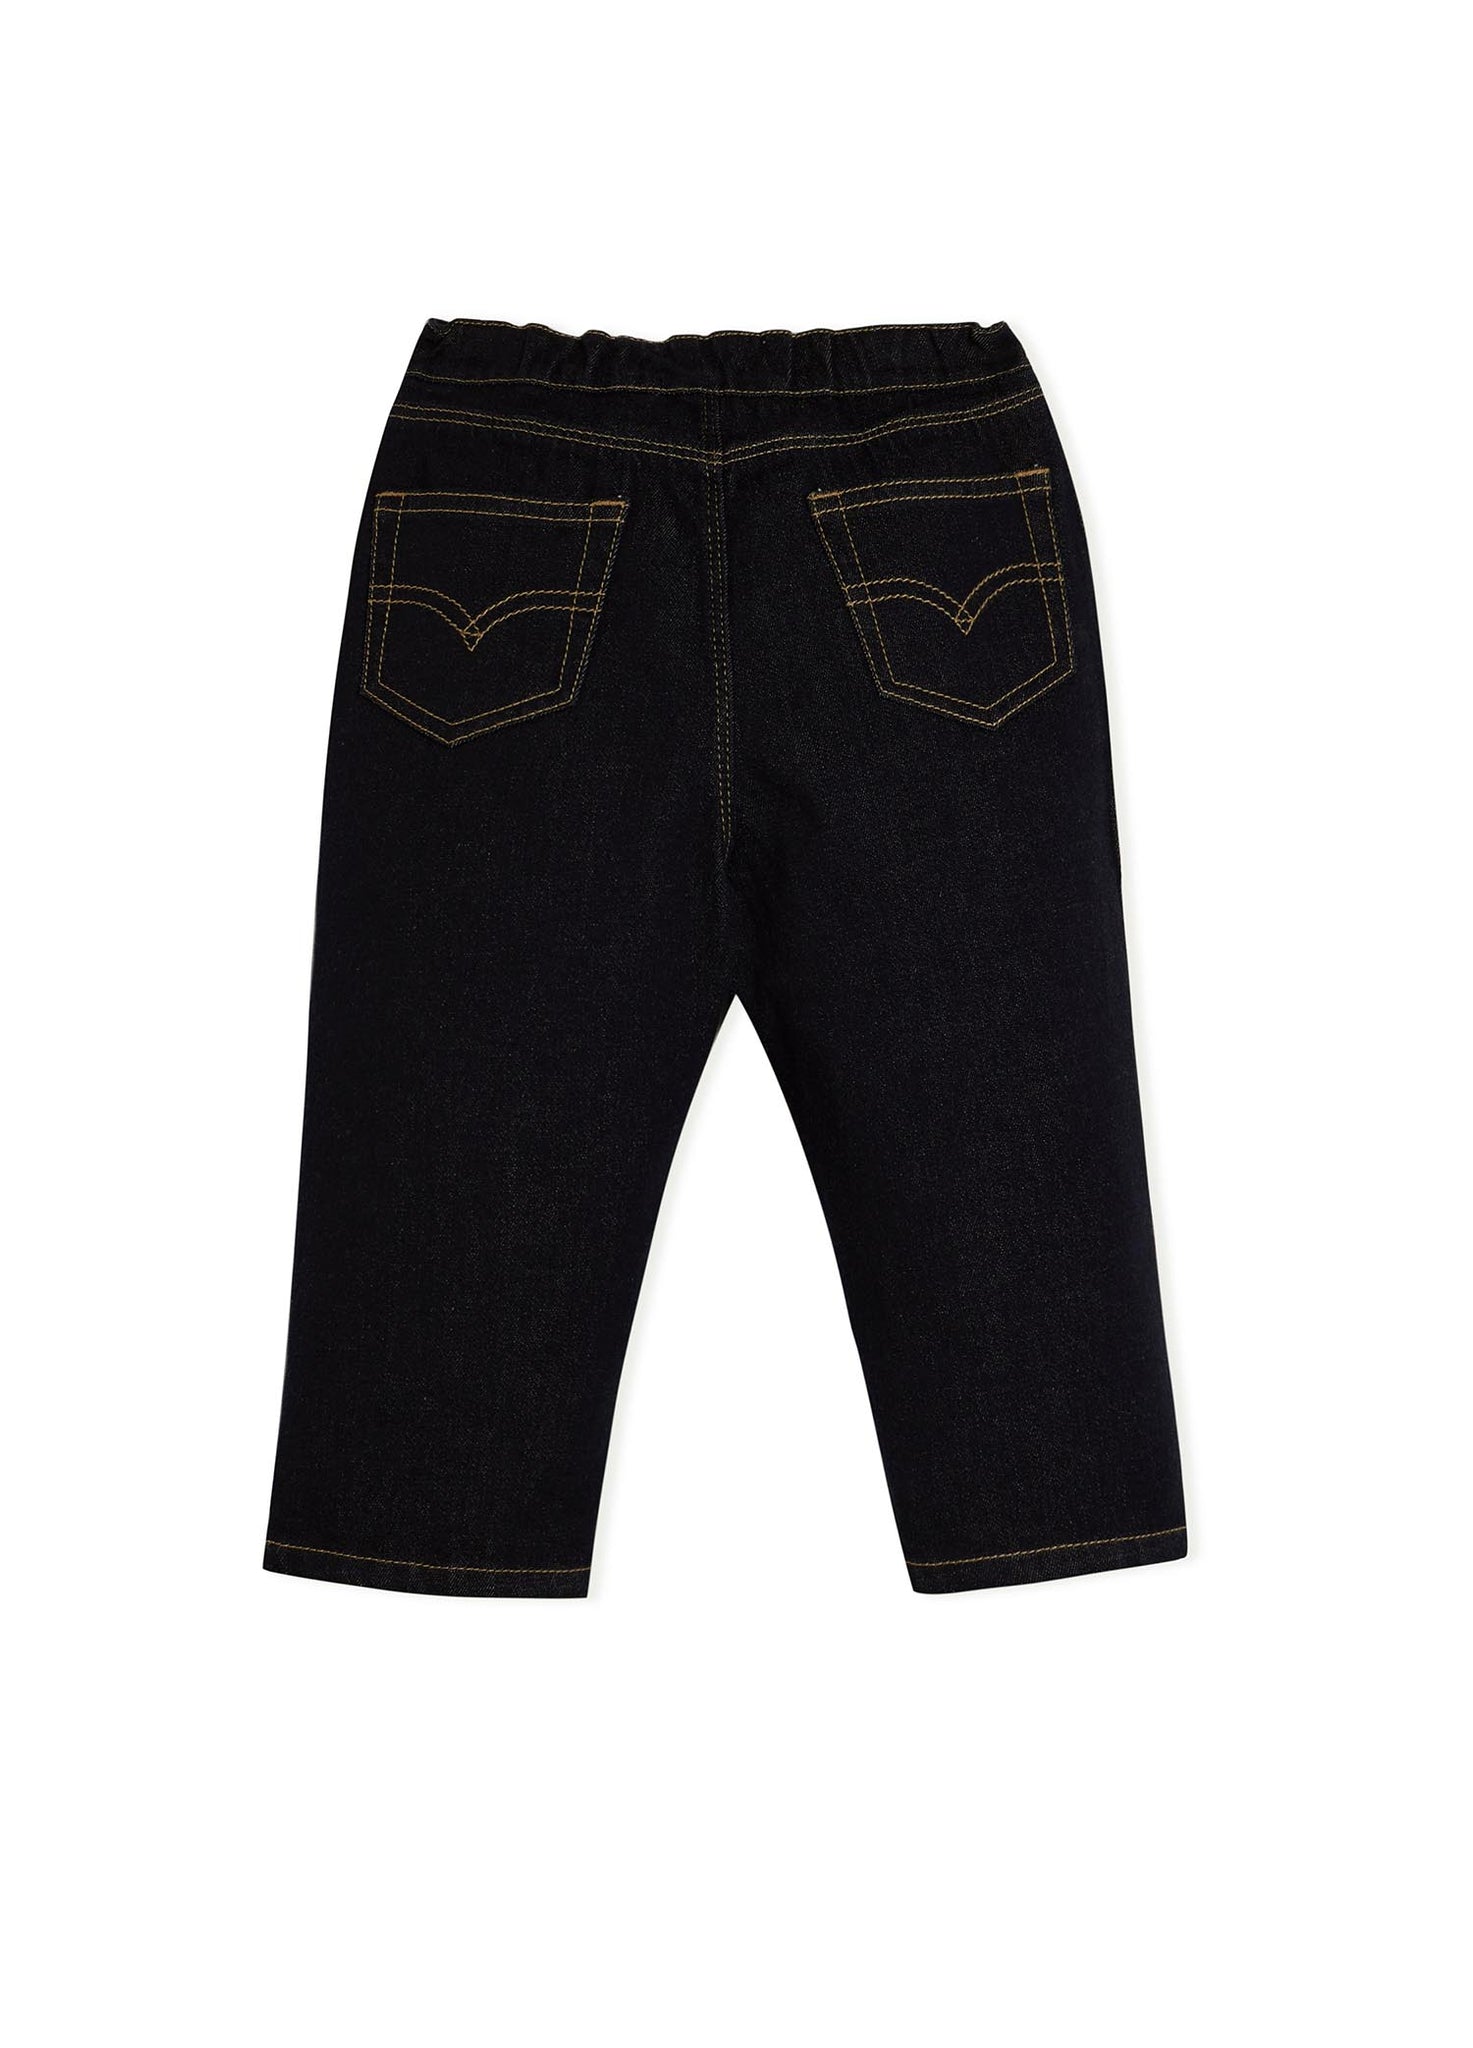 Jeans / jnby for mini Elasticated Waist Jeans